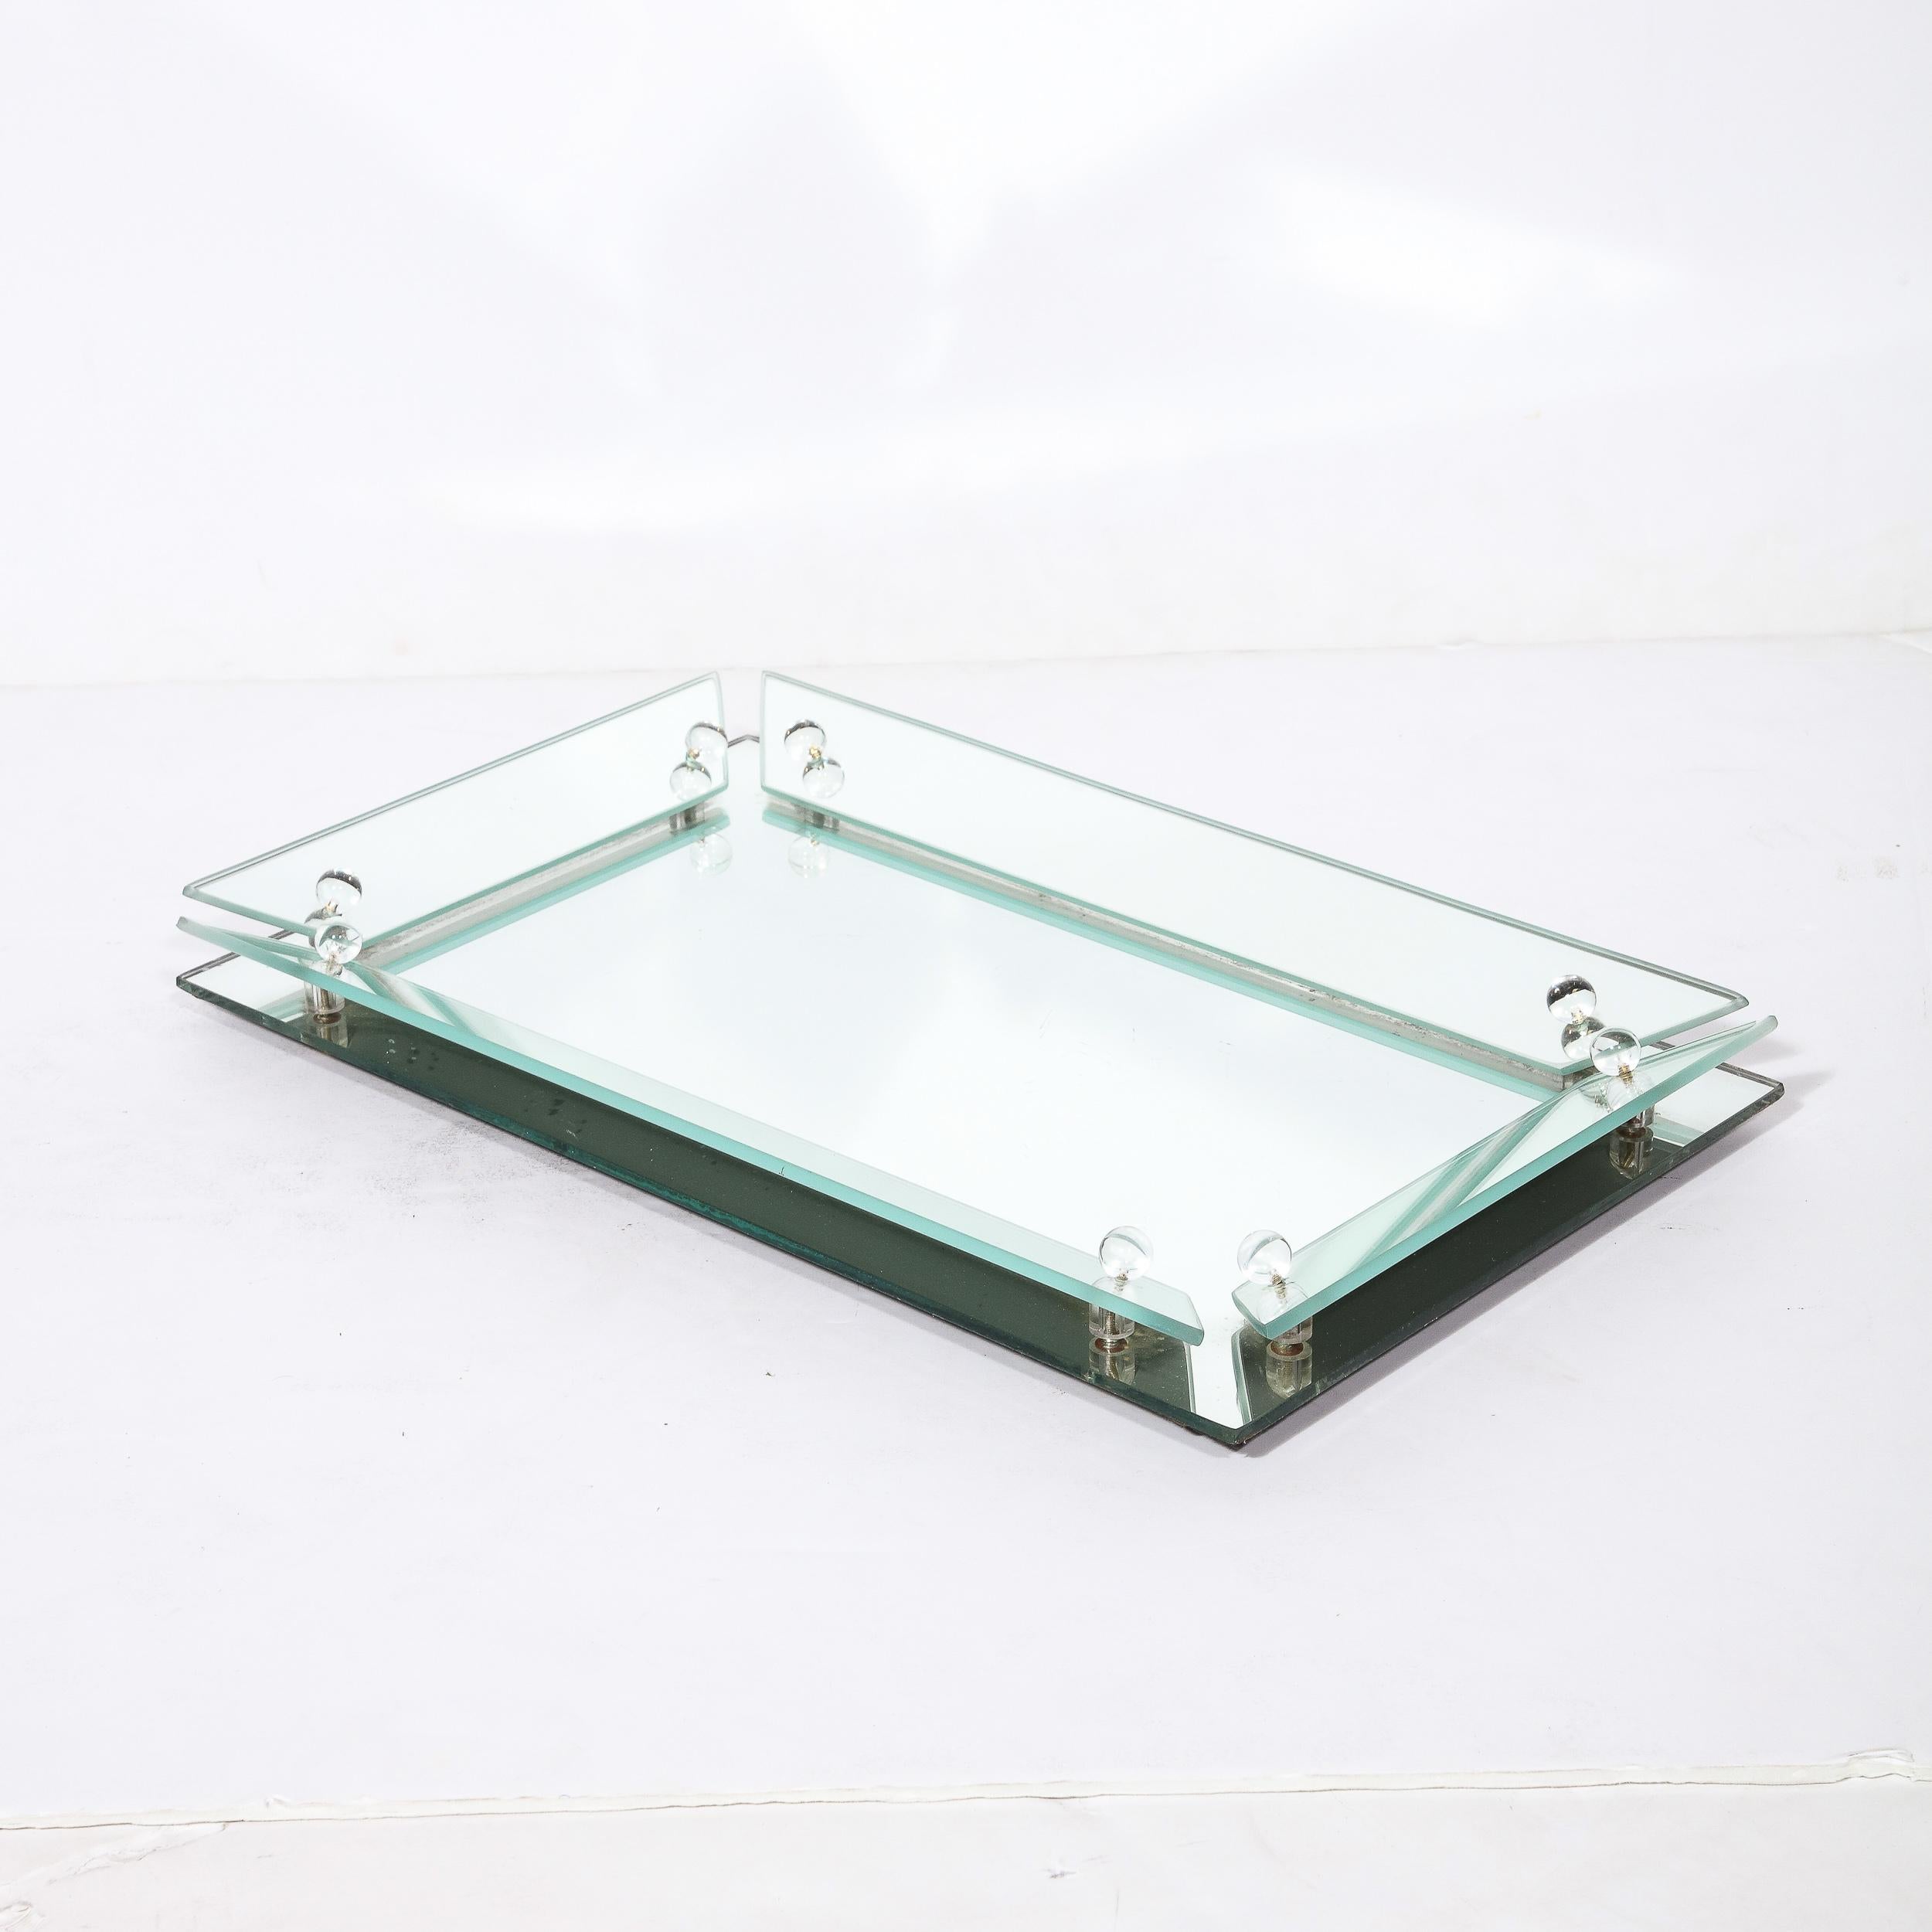 This elegant Art Deco Vanity Tray originates from the United States, Circa 1935. Composed in cut and beveled mirror glass, the border of the tray angles inwards and is composed of spaced rectilinear elements attached with glass studs, two on each